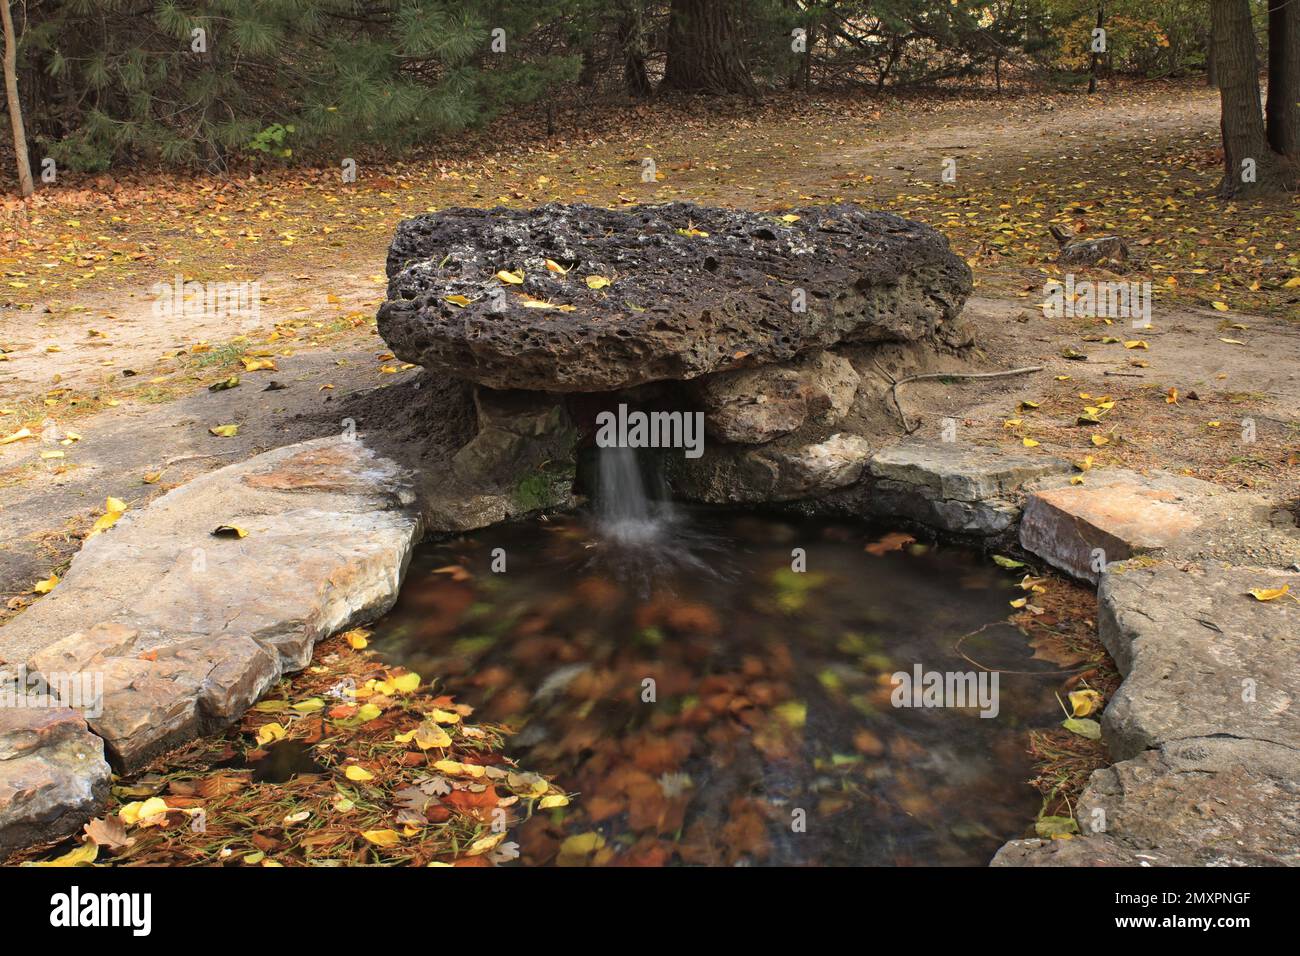 A Small water fall in the Fall with colorful leaves in the water. Stock Photo